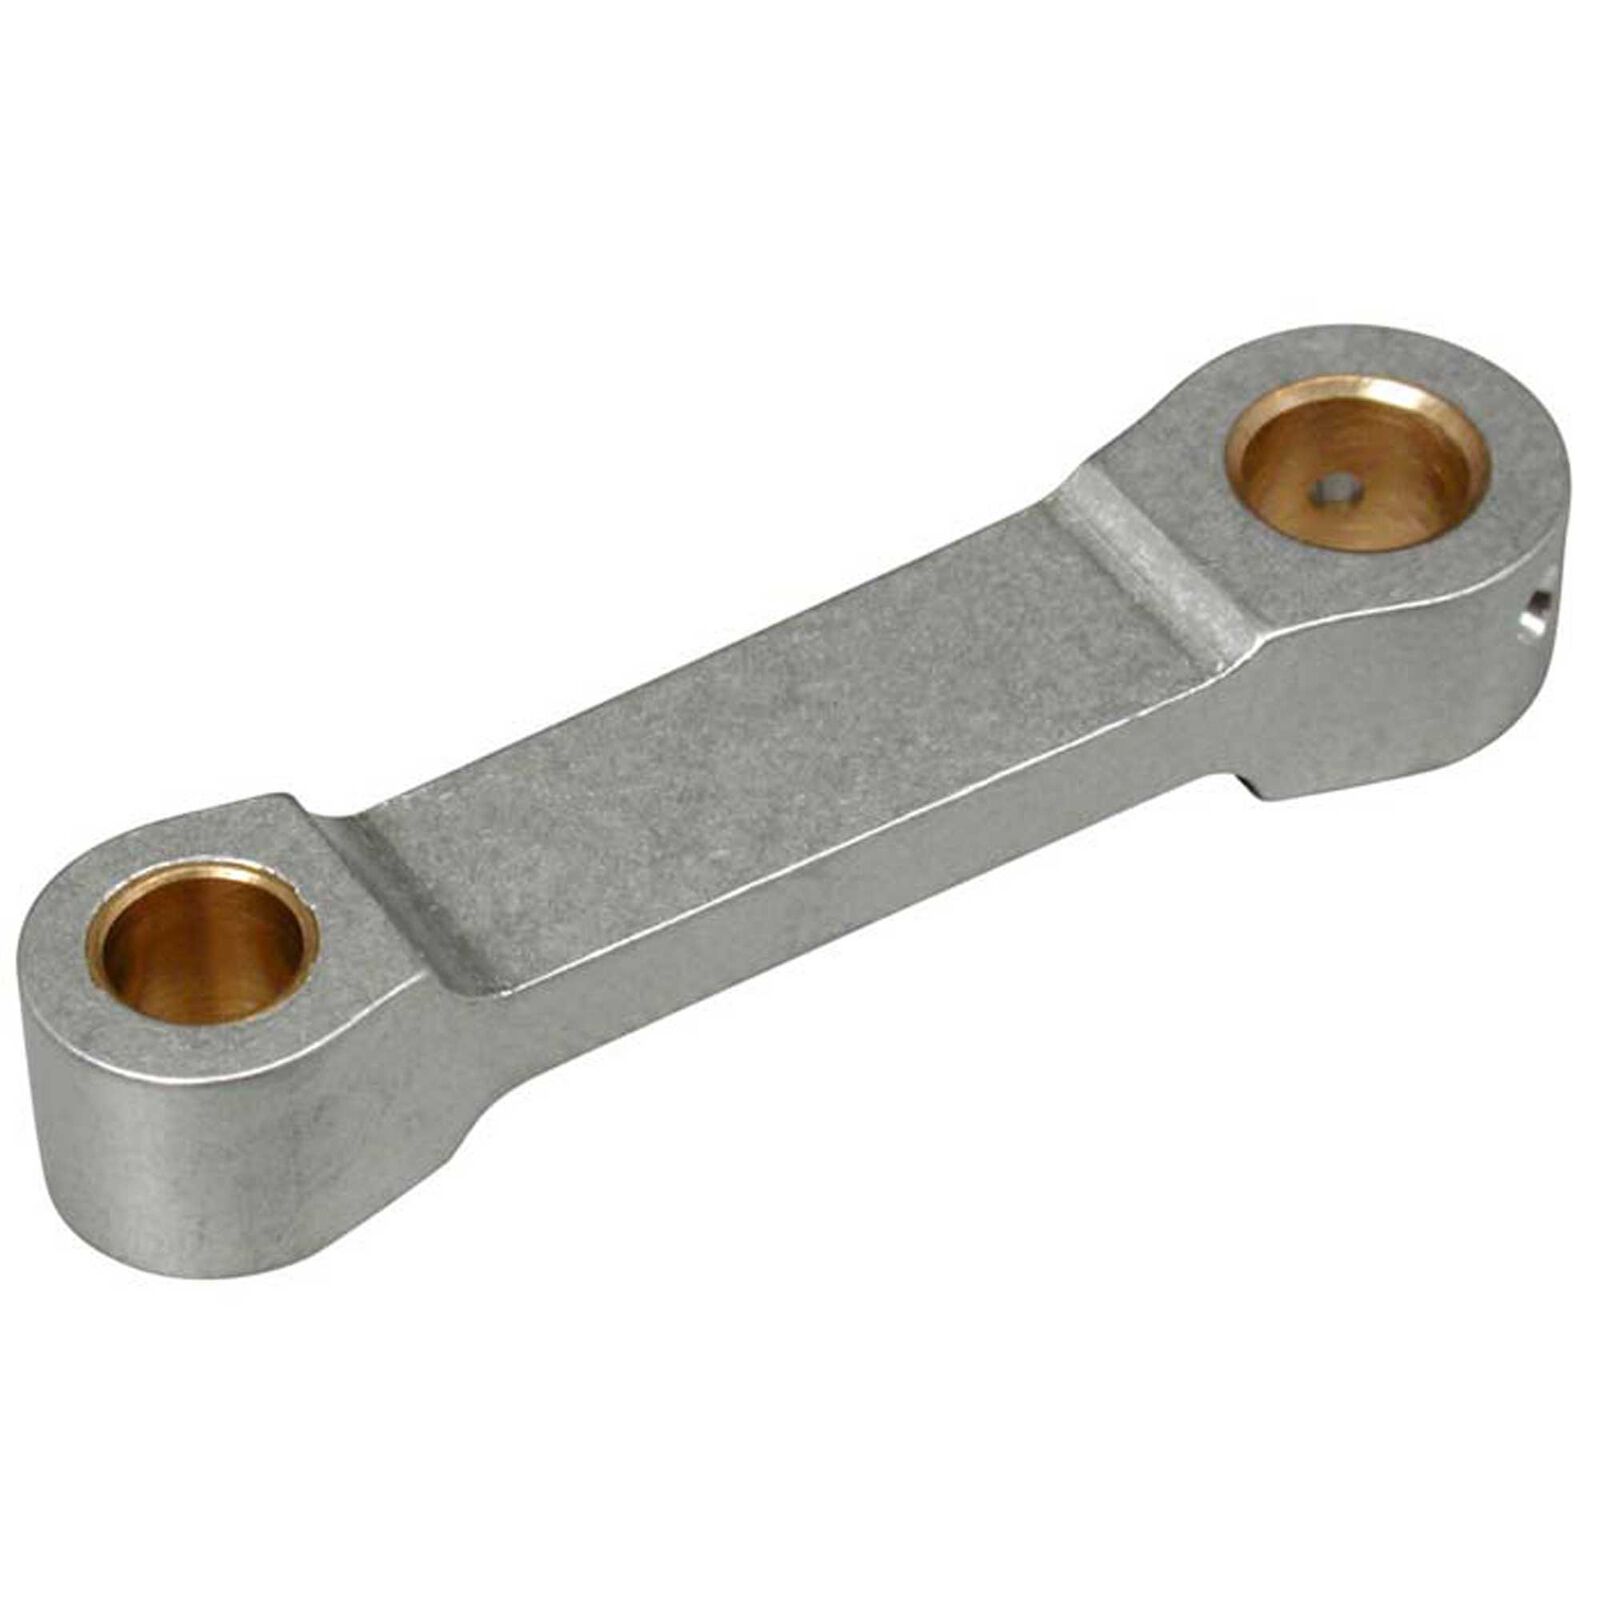 Connecting Rod: 21VF/SE